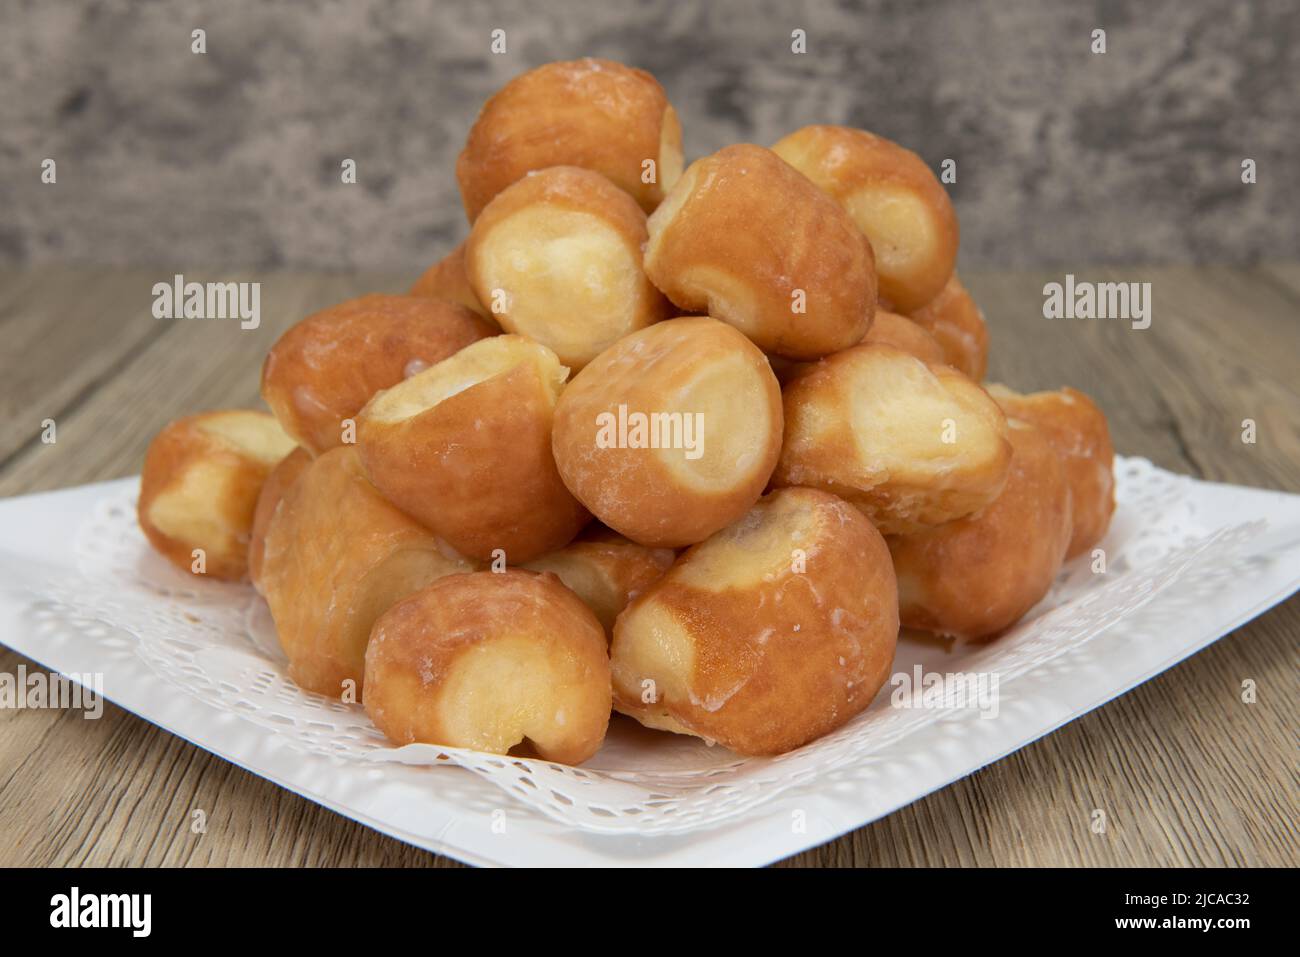 Tempting fresh from the oven glazed donut holes from the bakery stacked on a plate. Stock Photo